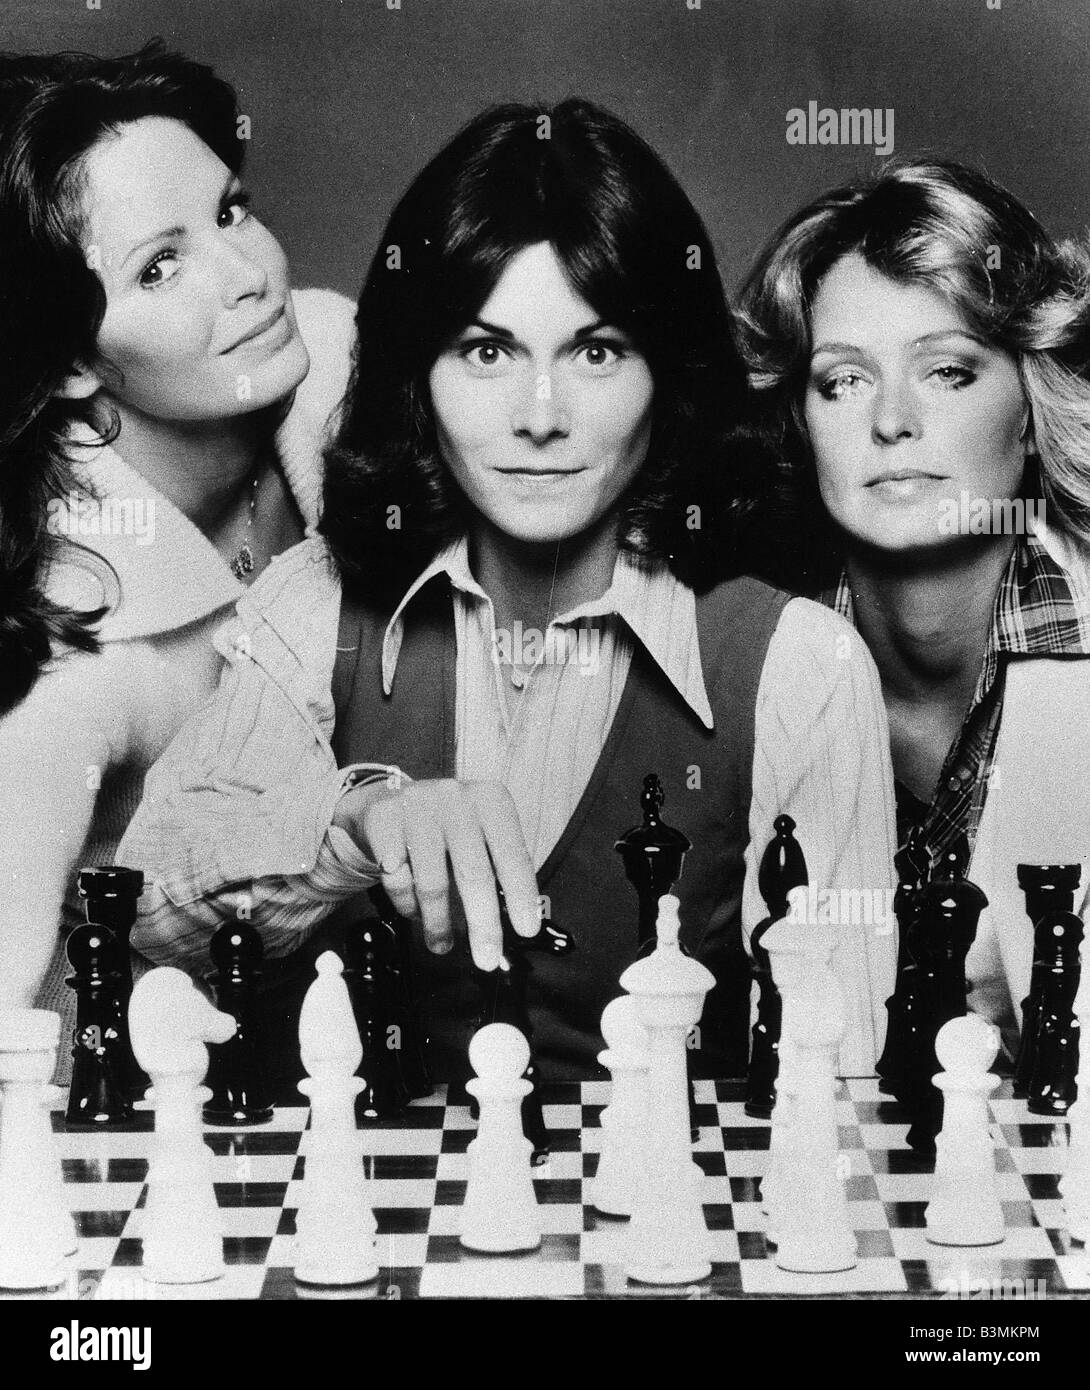 Charlie s angels Black and White Stock Photos & Images - Alamy